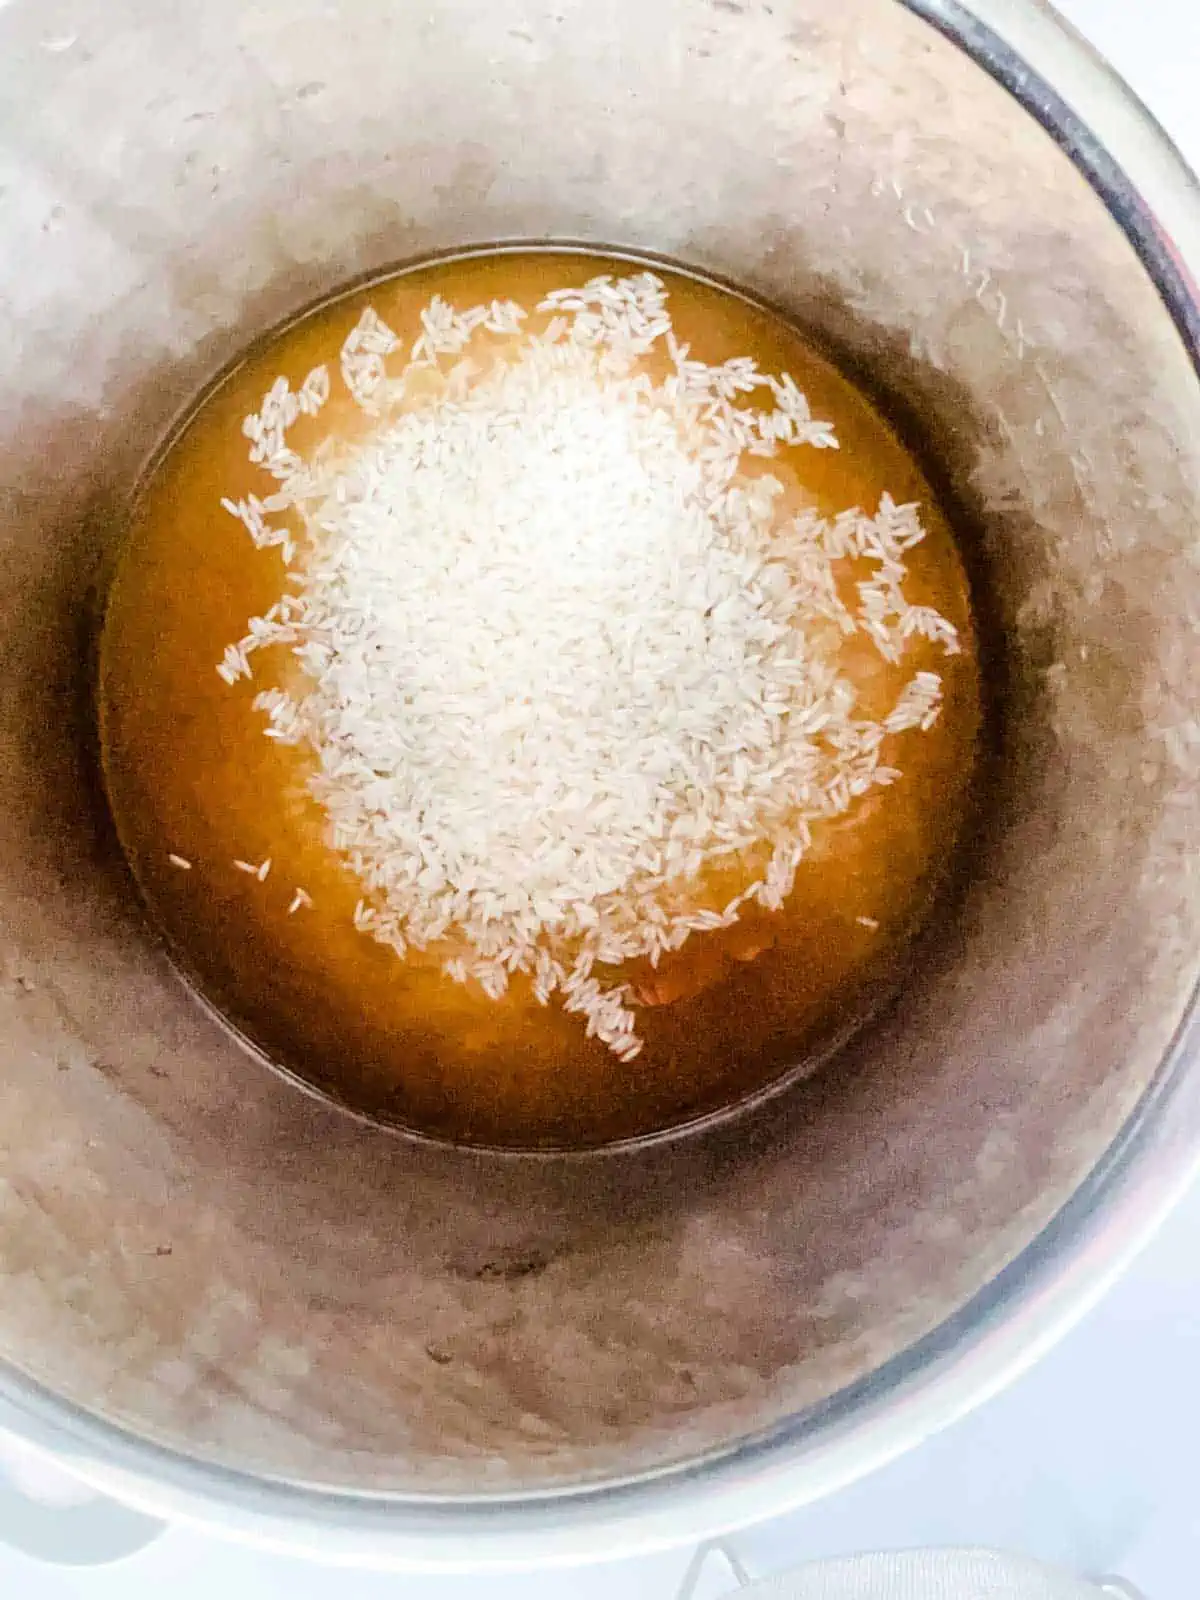 Broth and rice in and instant pot.